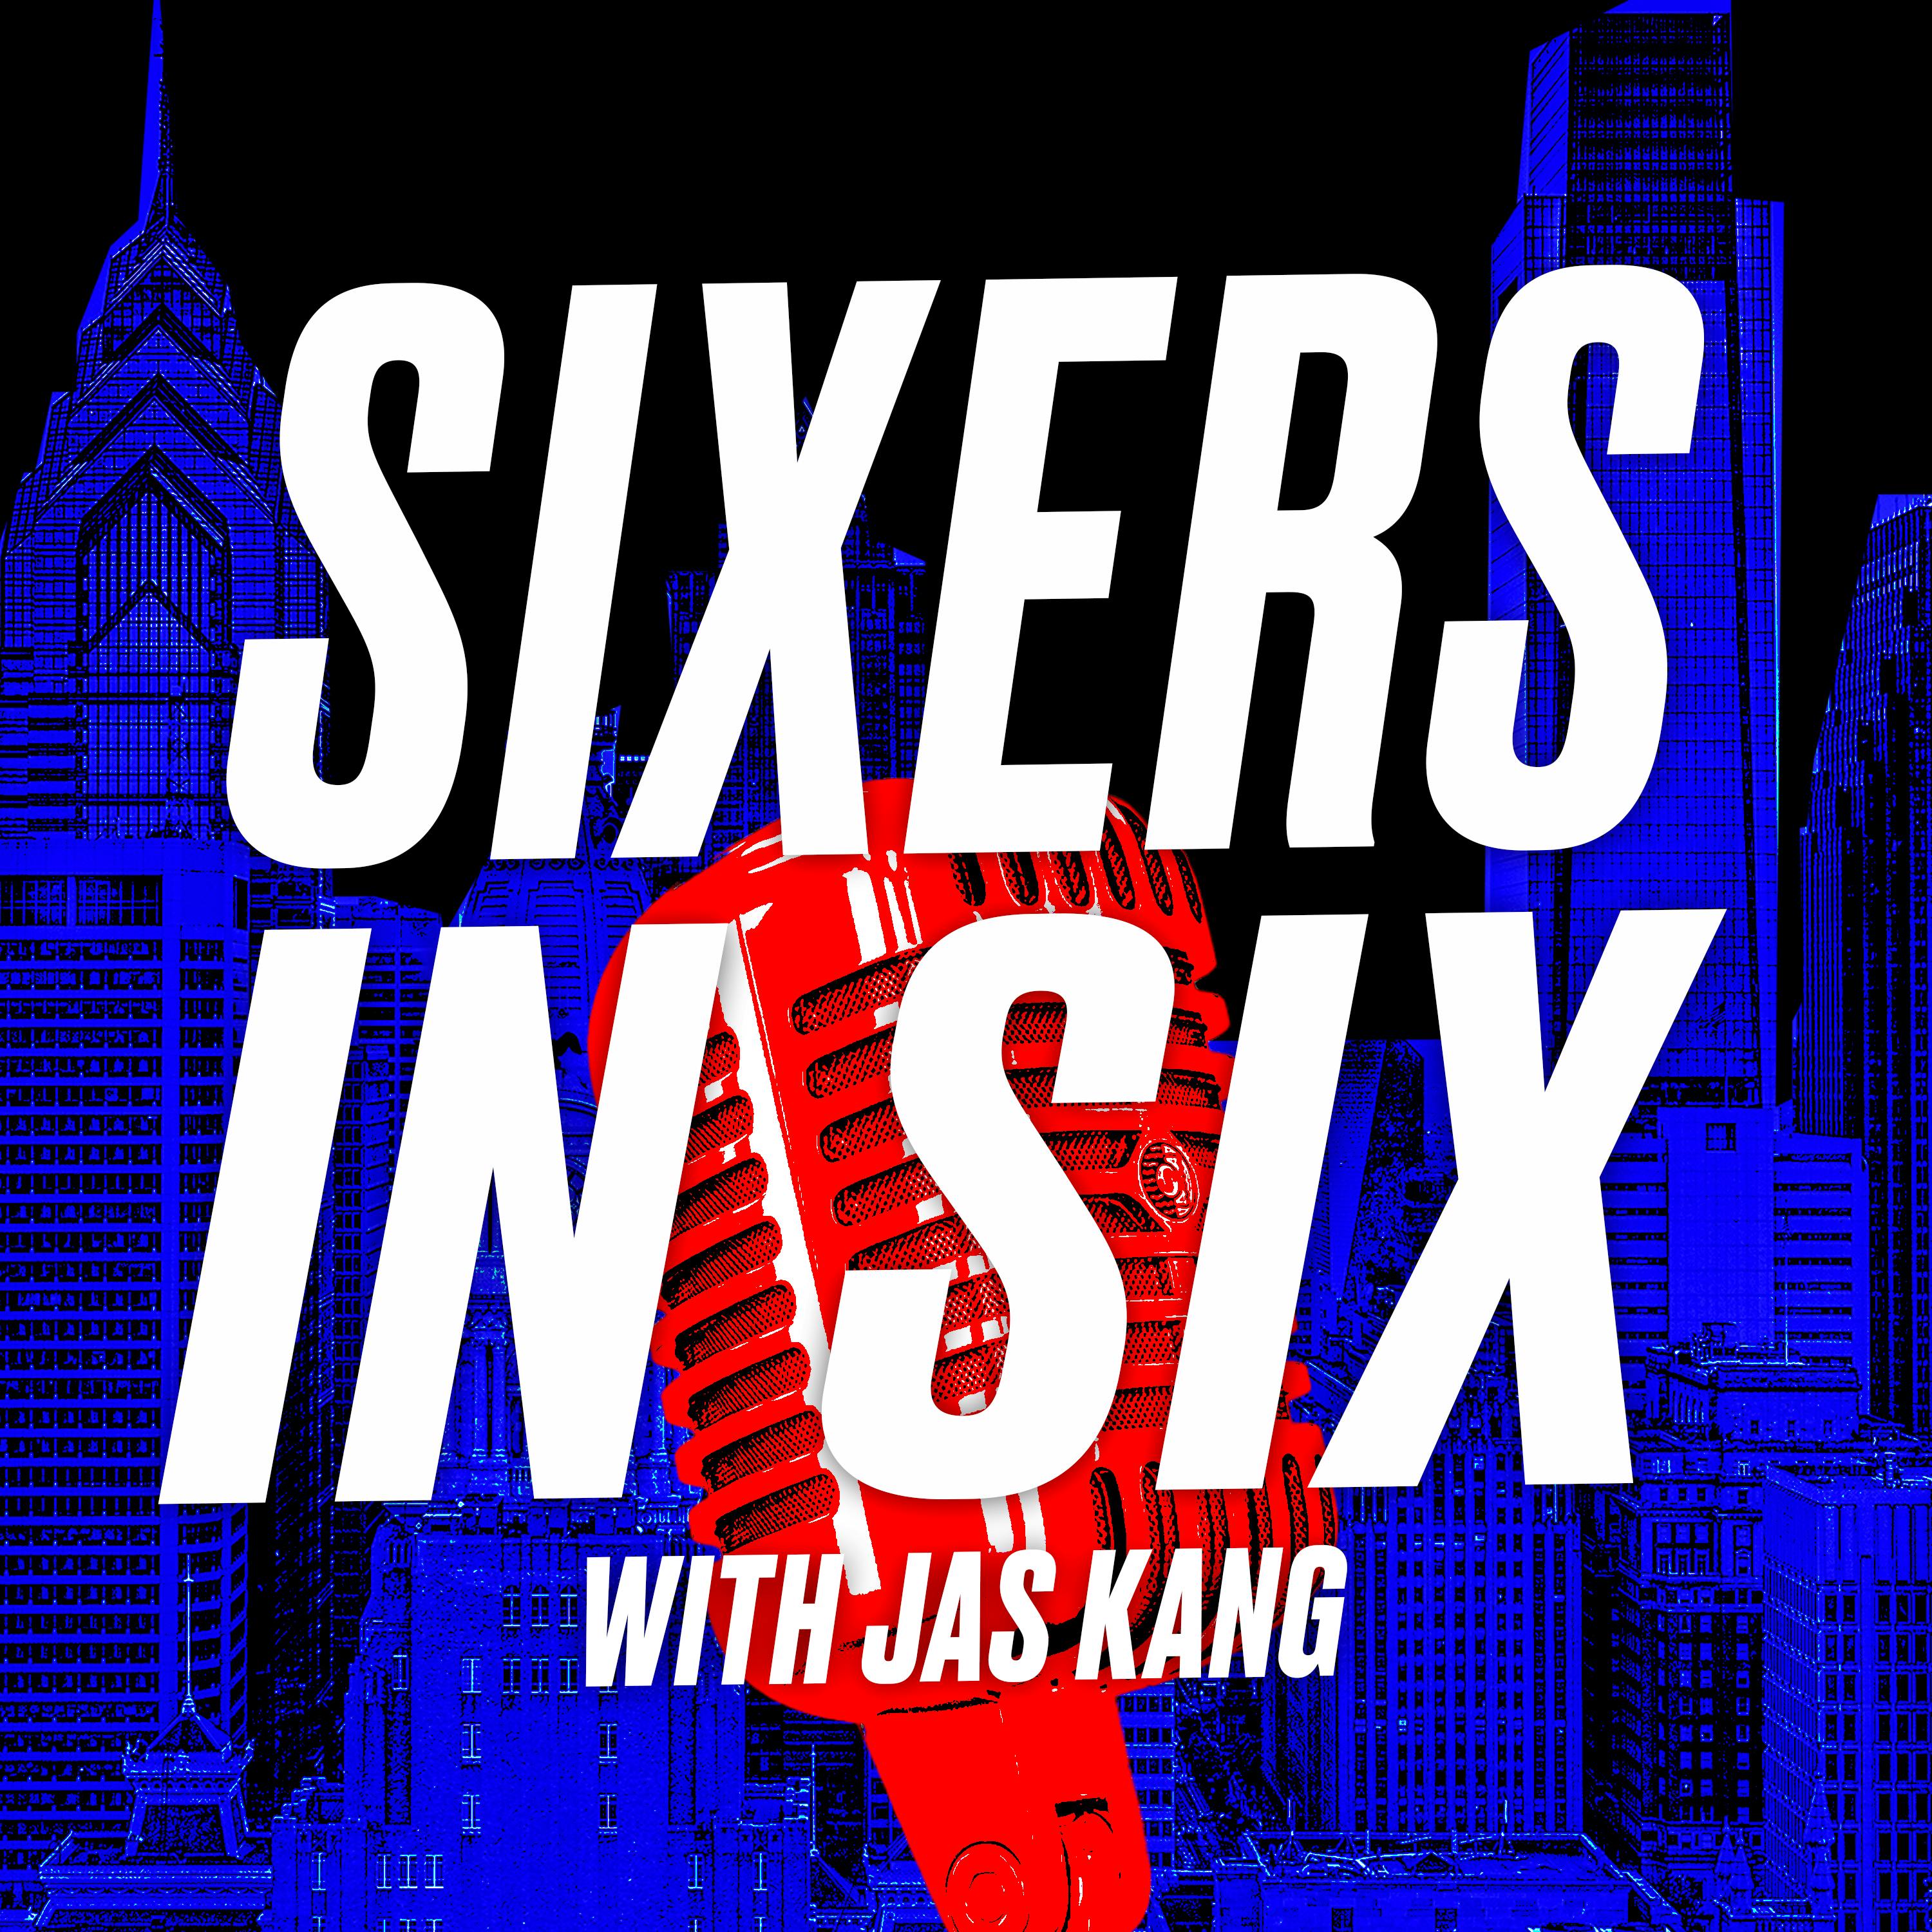 Tired Sixers come up short against the Hornets. Sixers in Six: Hosted by Jas Kang